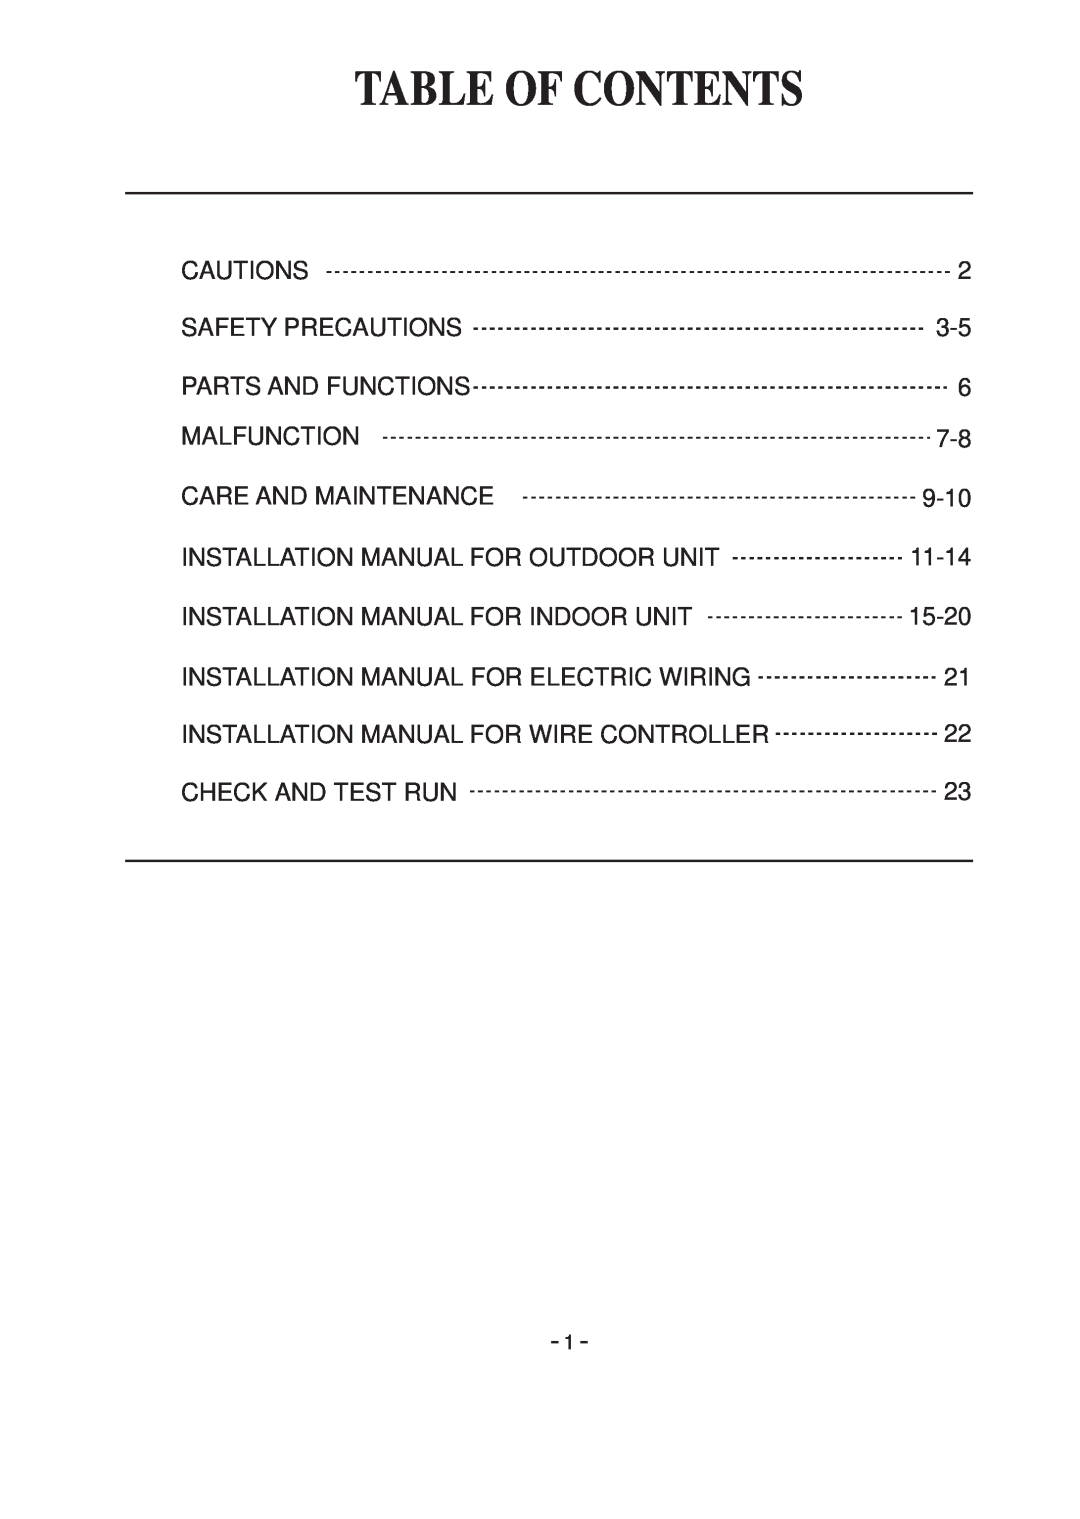 Haier AD142AMBIA, AU142AFBIA installation manual Table Of Contents 